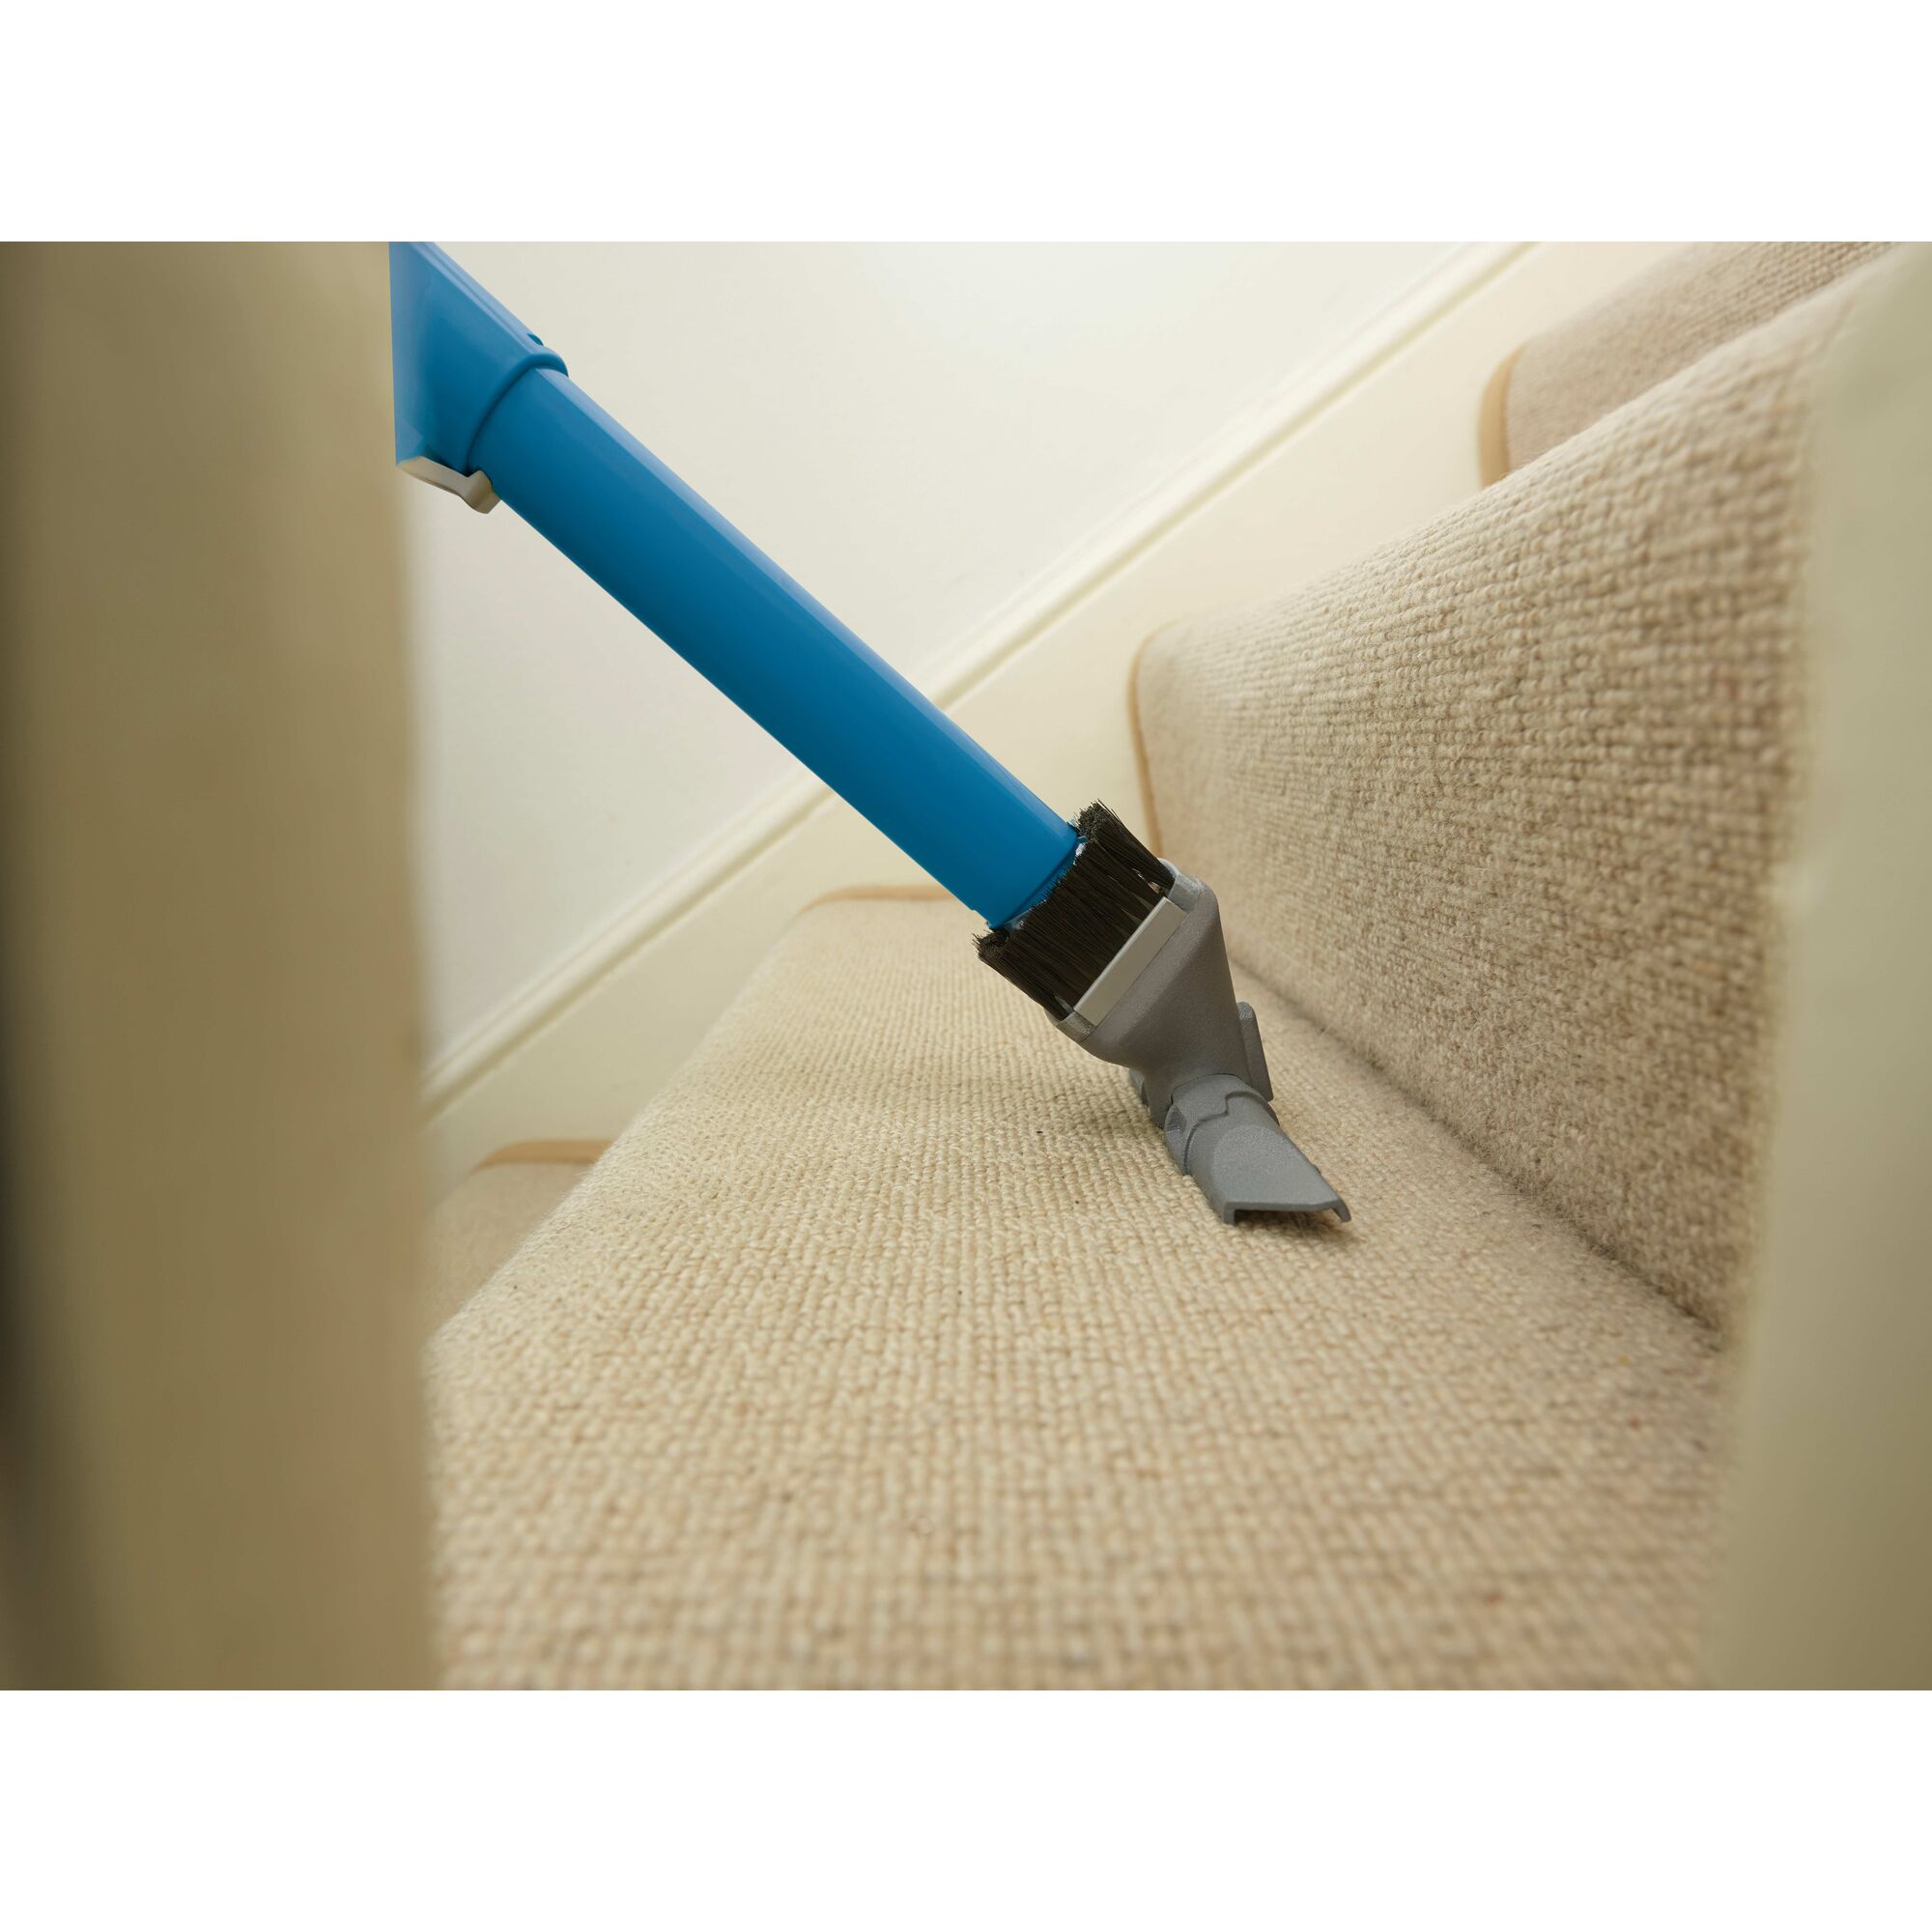 Powerseries pro cordless 2 in 1 vacuum cleaning stairs.